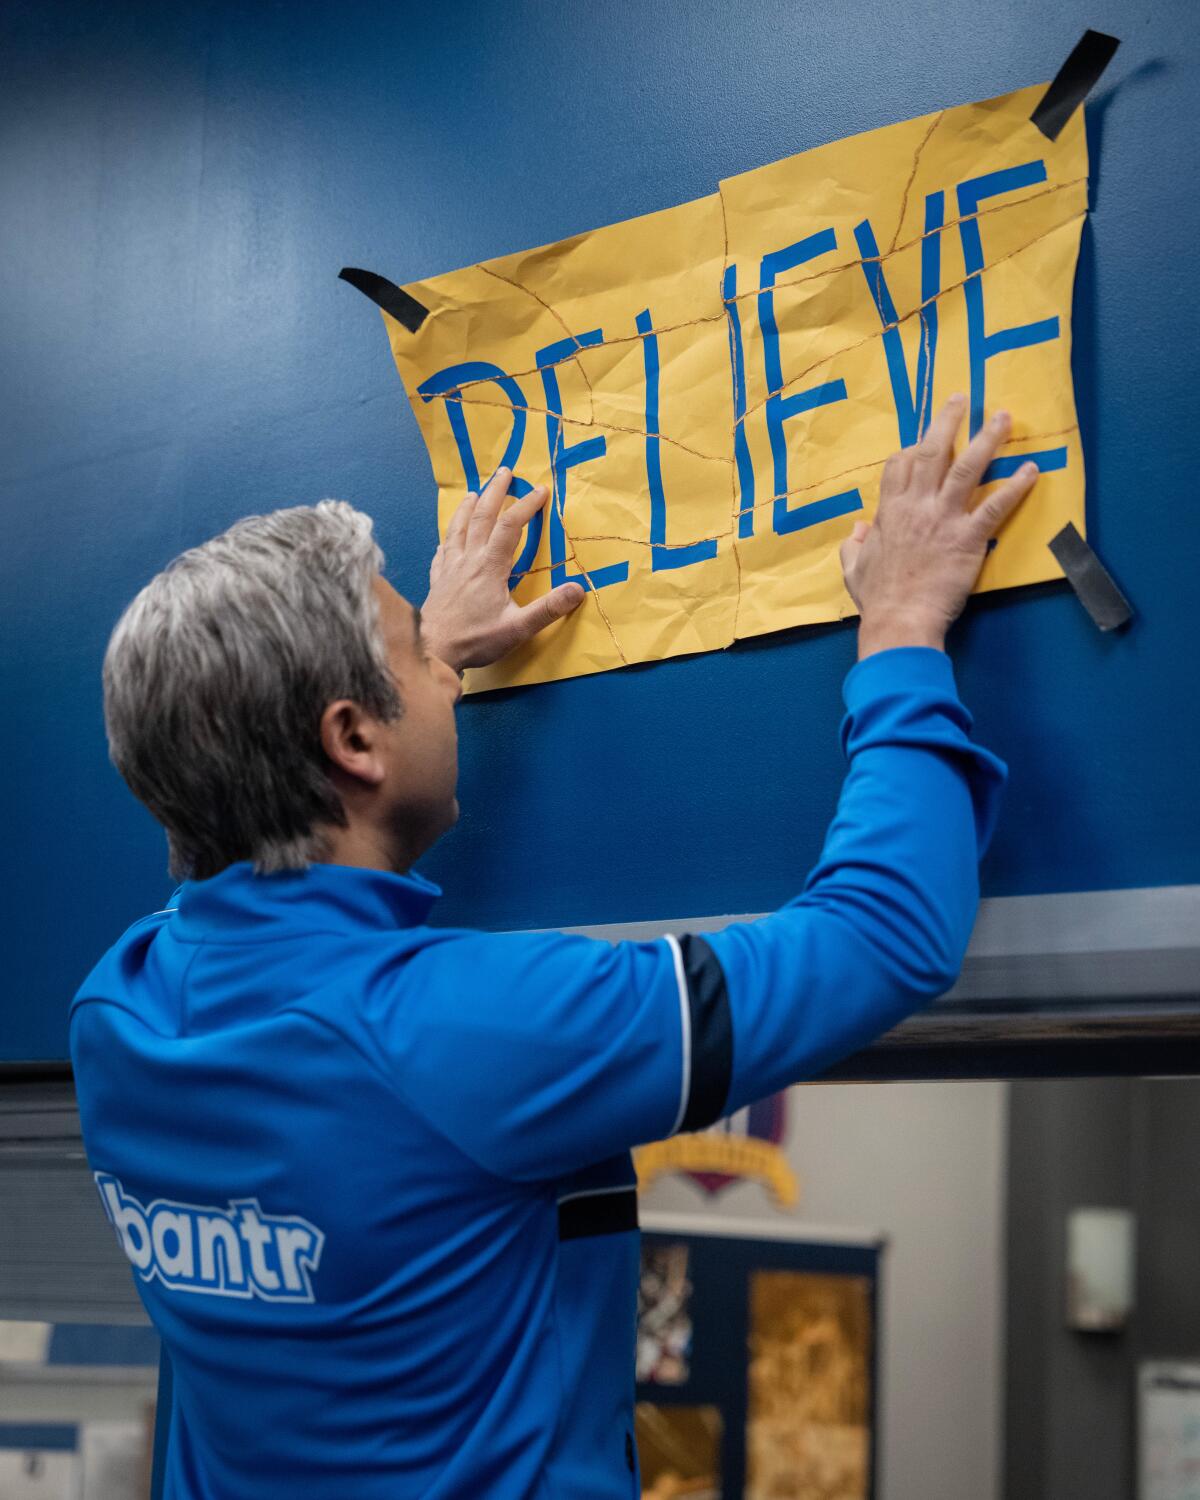 A man hangs a torn and pieced together sign reading "BELIEVE" above a door.